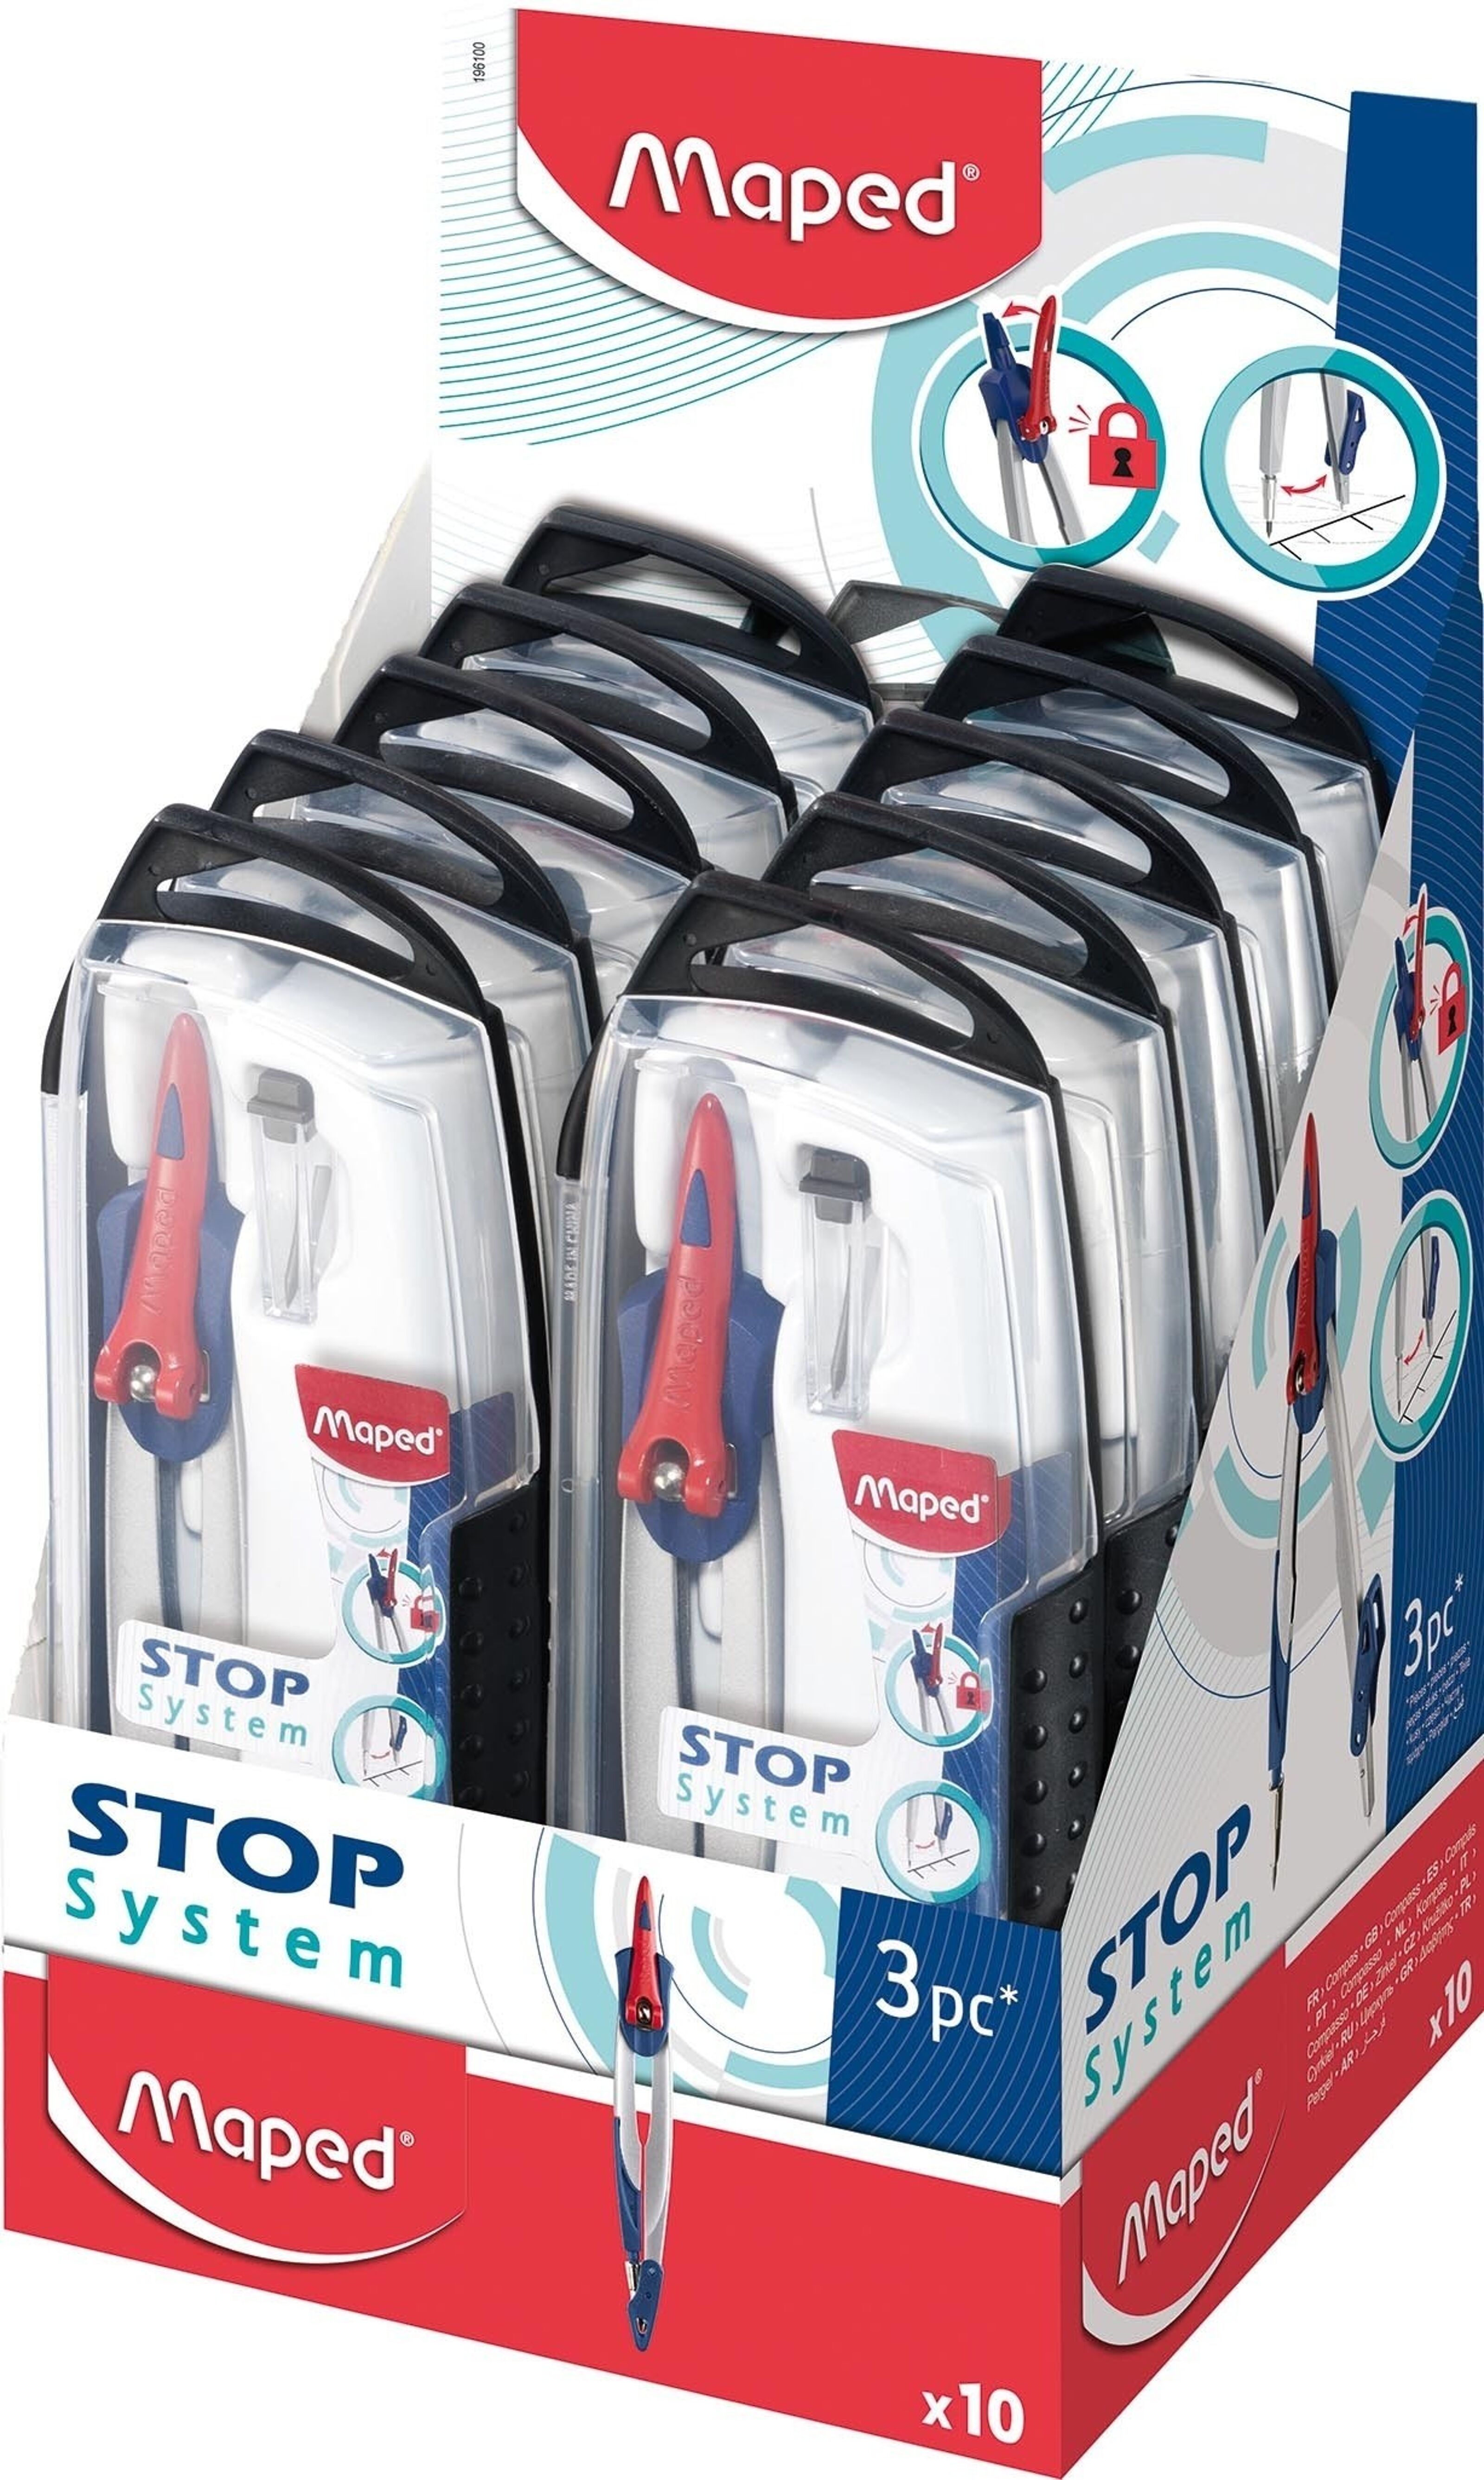 Buy wholesale 3-piece STOP SYSTEM box: 1 compass, 1 ring, 1 pencil